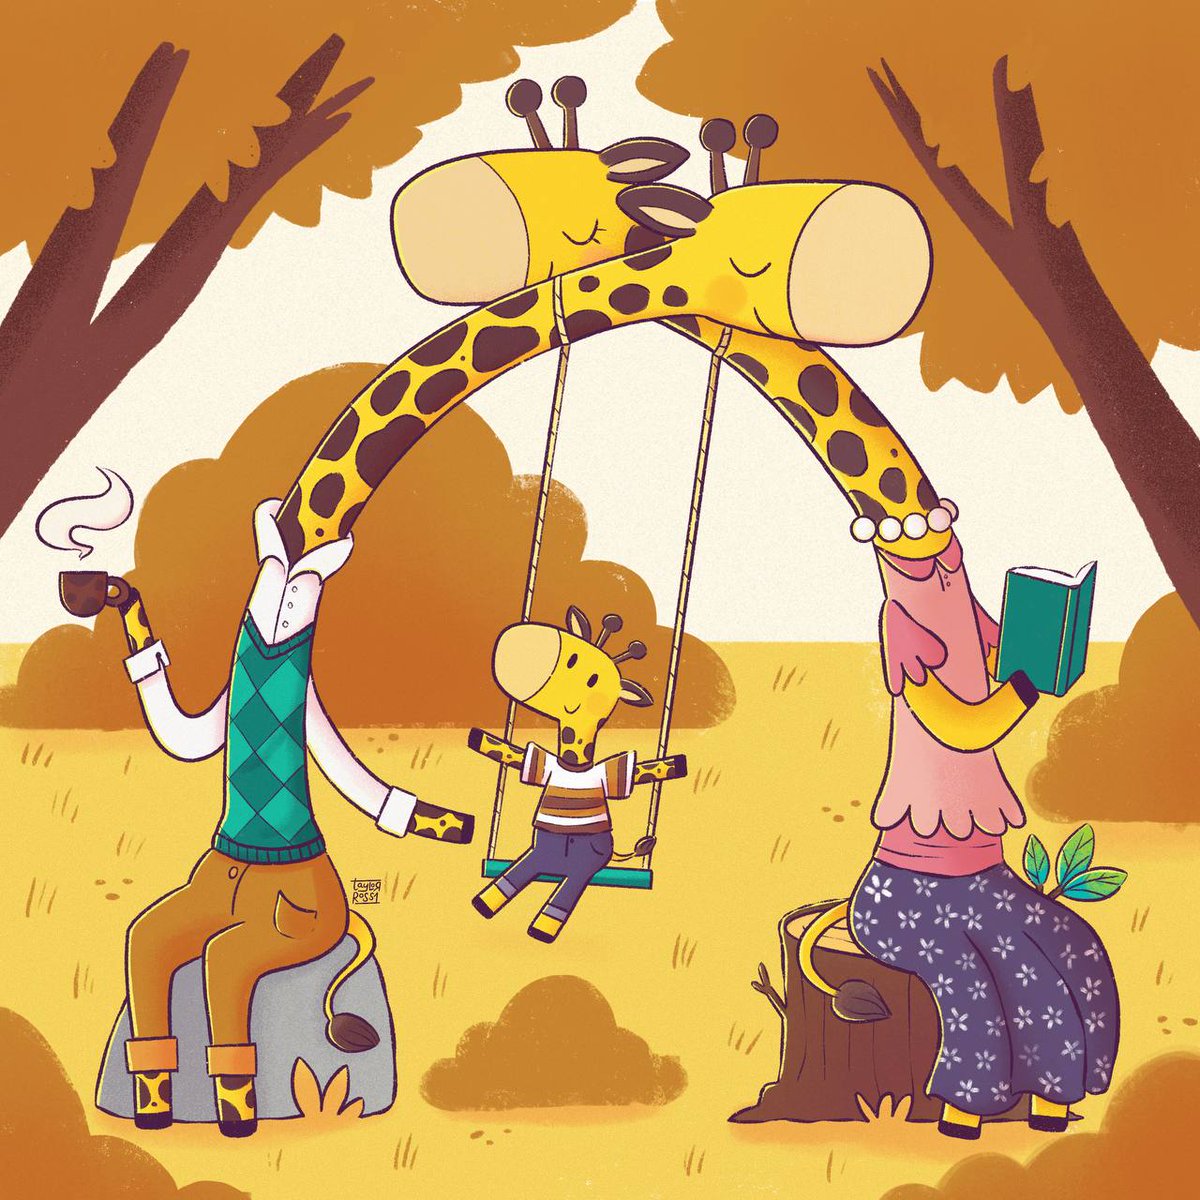 'Family'🦒
The prompt for this June #scbwidrawthis is yellow! Let's enjoy some time outside together ❤️
#kidlit #procreate #yellow #childrenillustration #digitalart